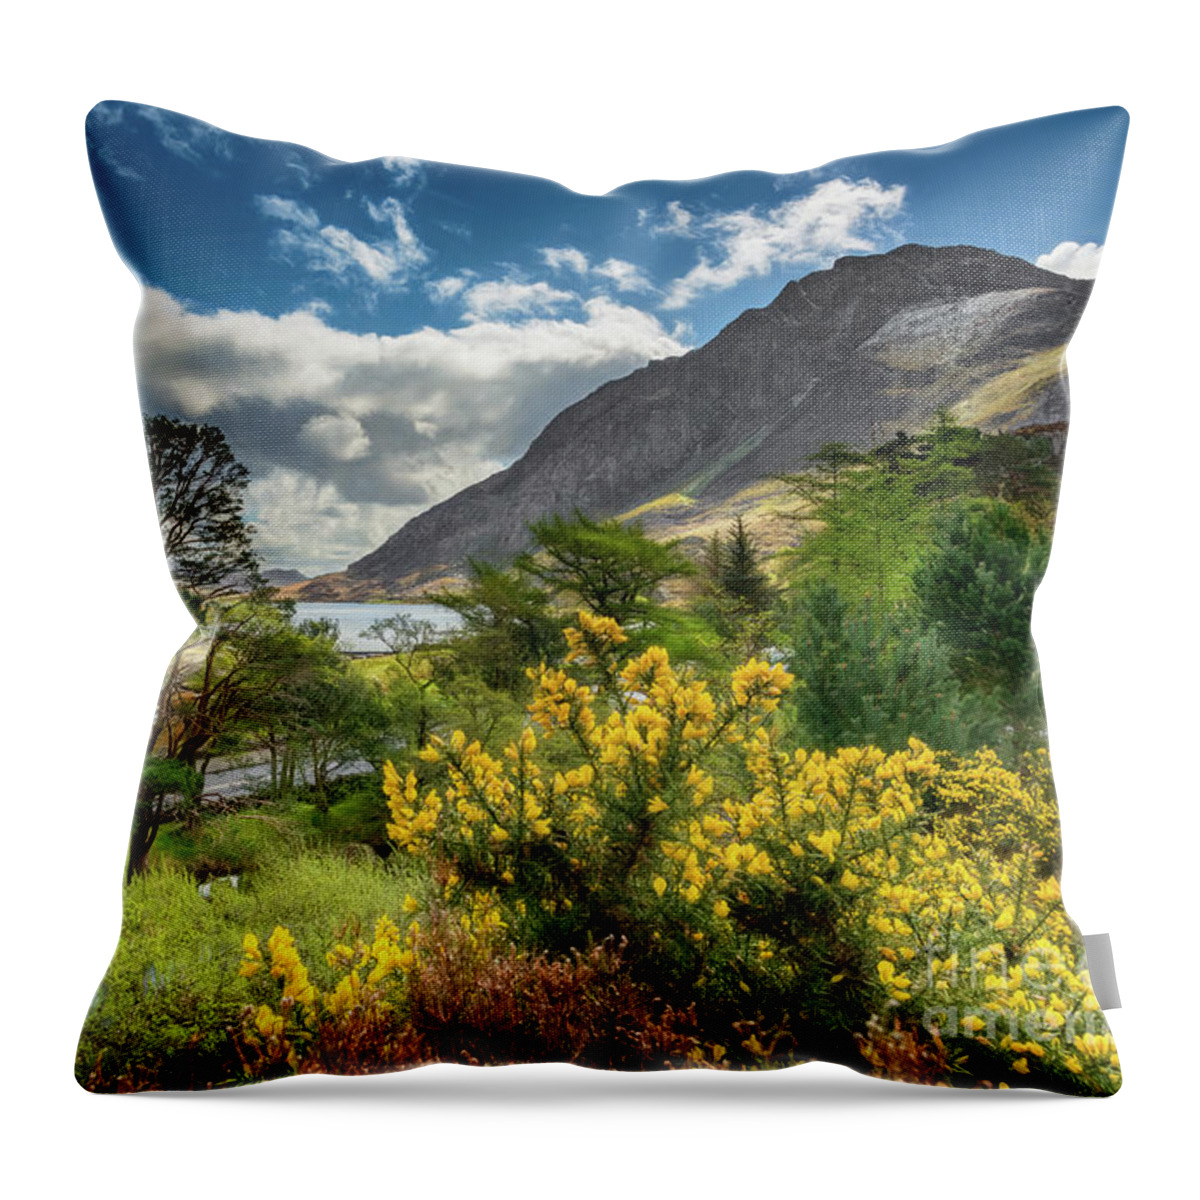 Tryfan Mountain Throw Pillow featuring the photograph Mountain Flora by Adrian Evans